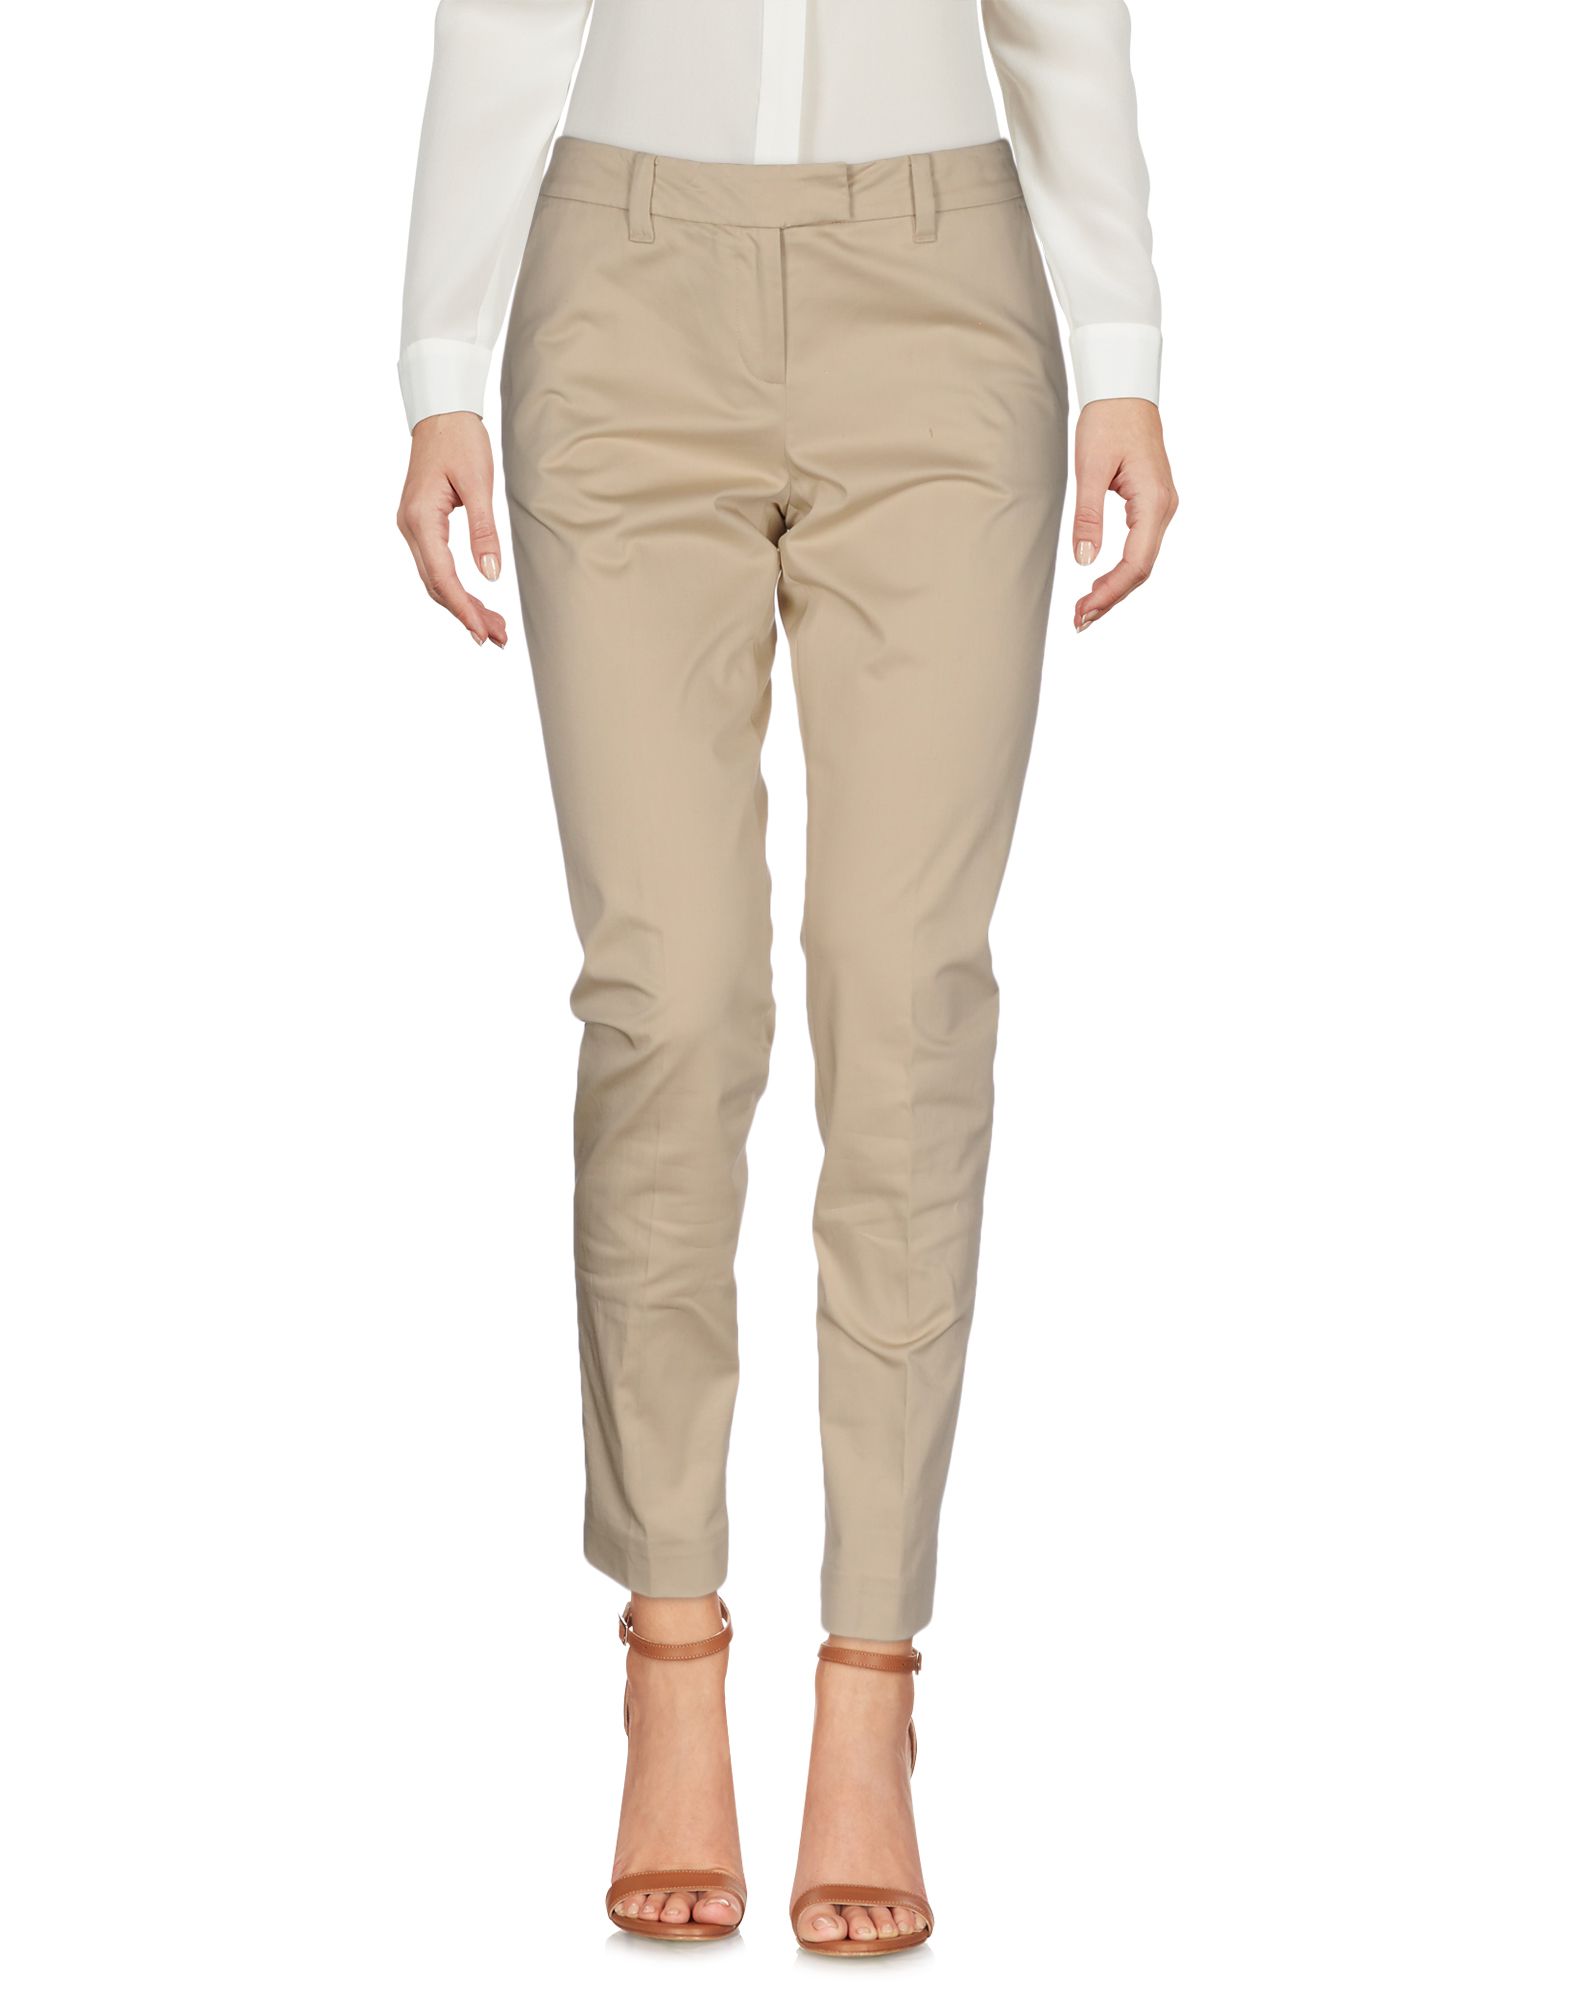 tommy hilfiger pants Cheaper Than Retail Price> Accessories and lifestyle products for women men -